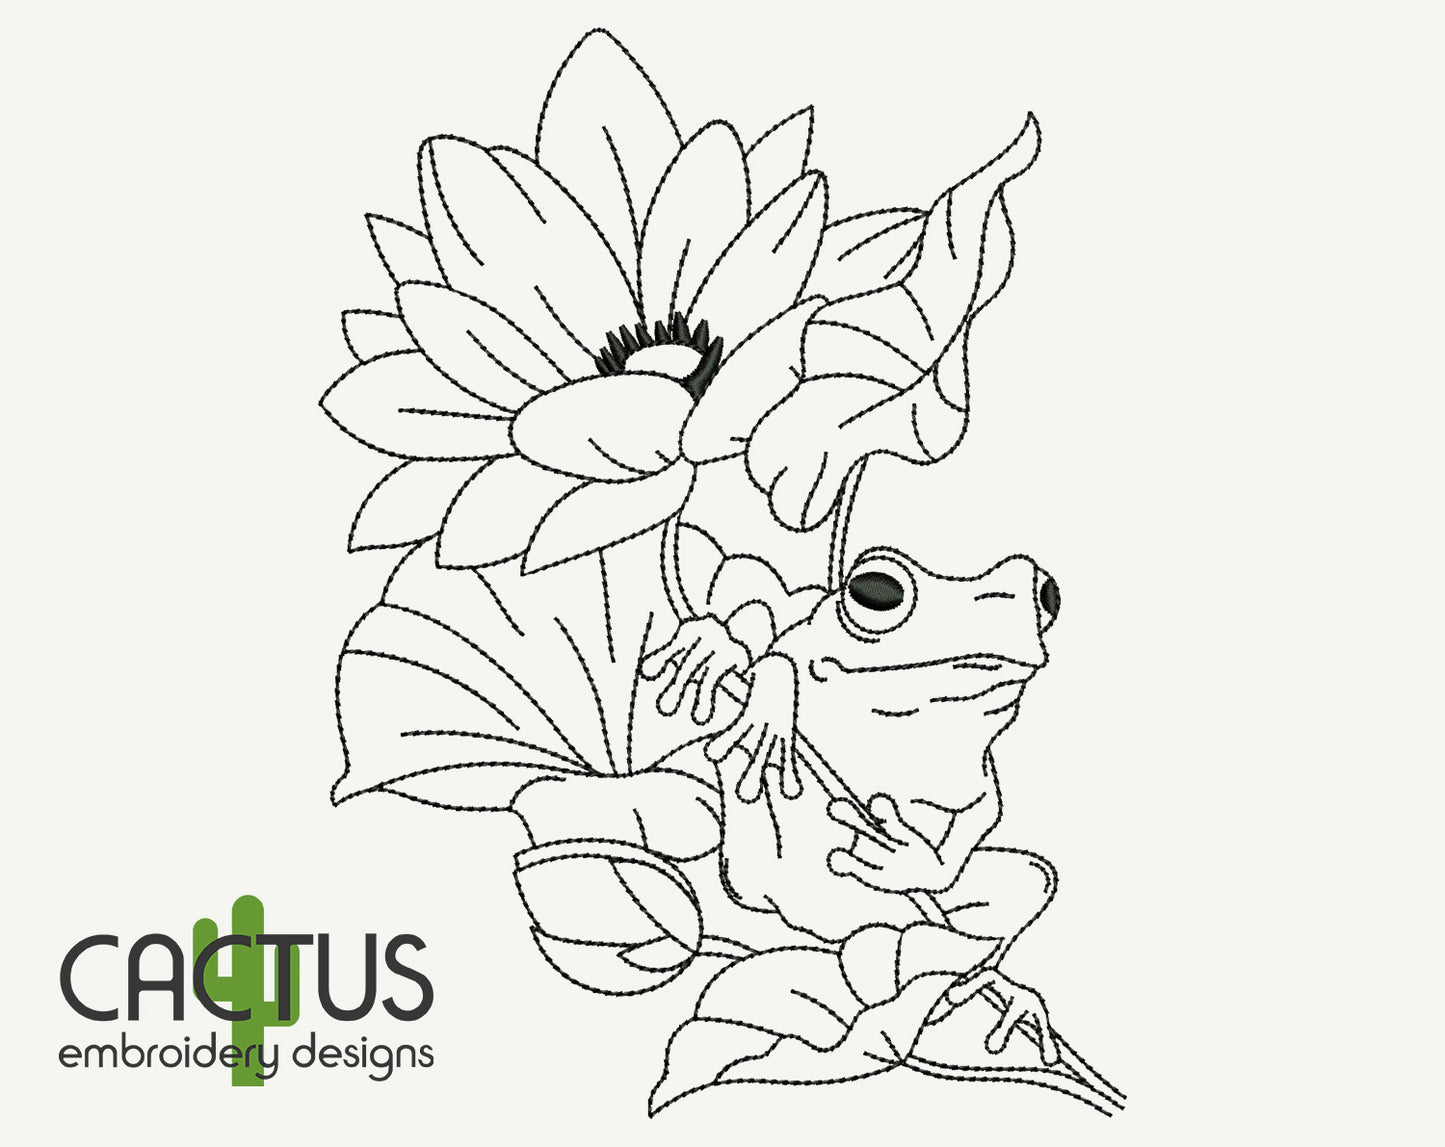 Frog Lotus Embroidery Design